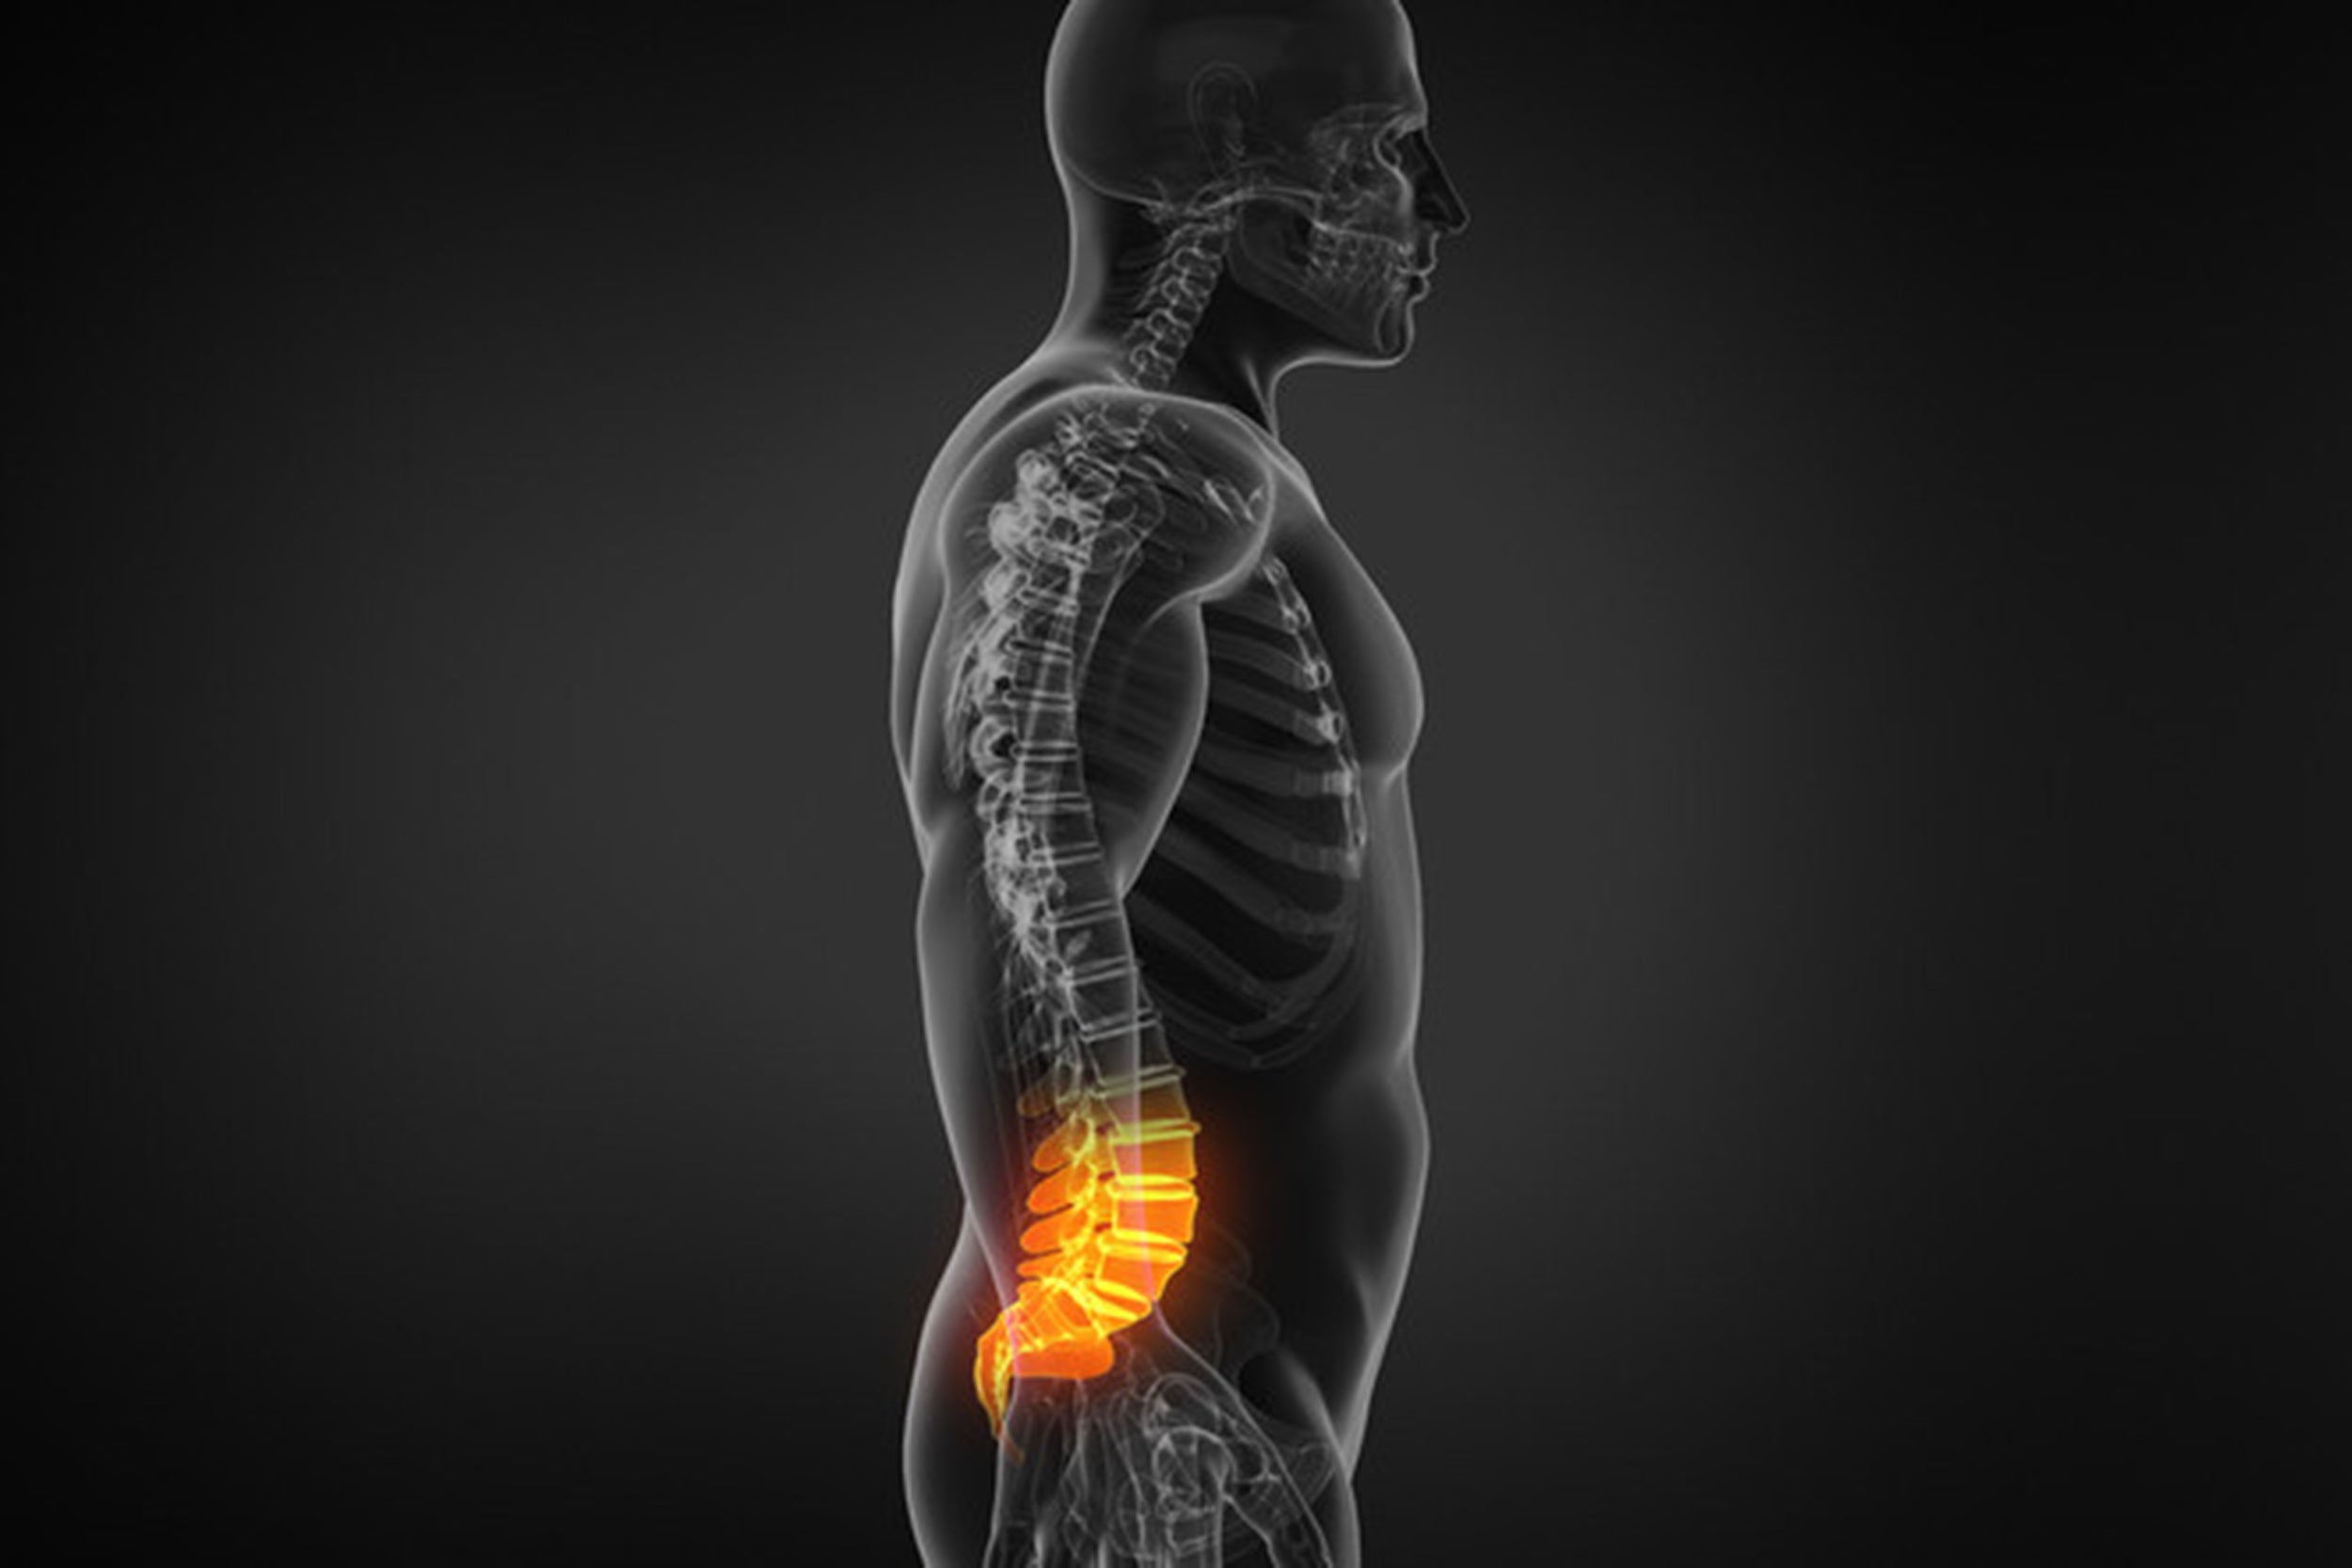 Back Pain: The Universal Language - What Causes My Spinal Pain?